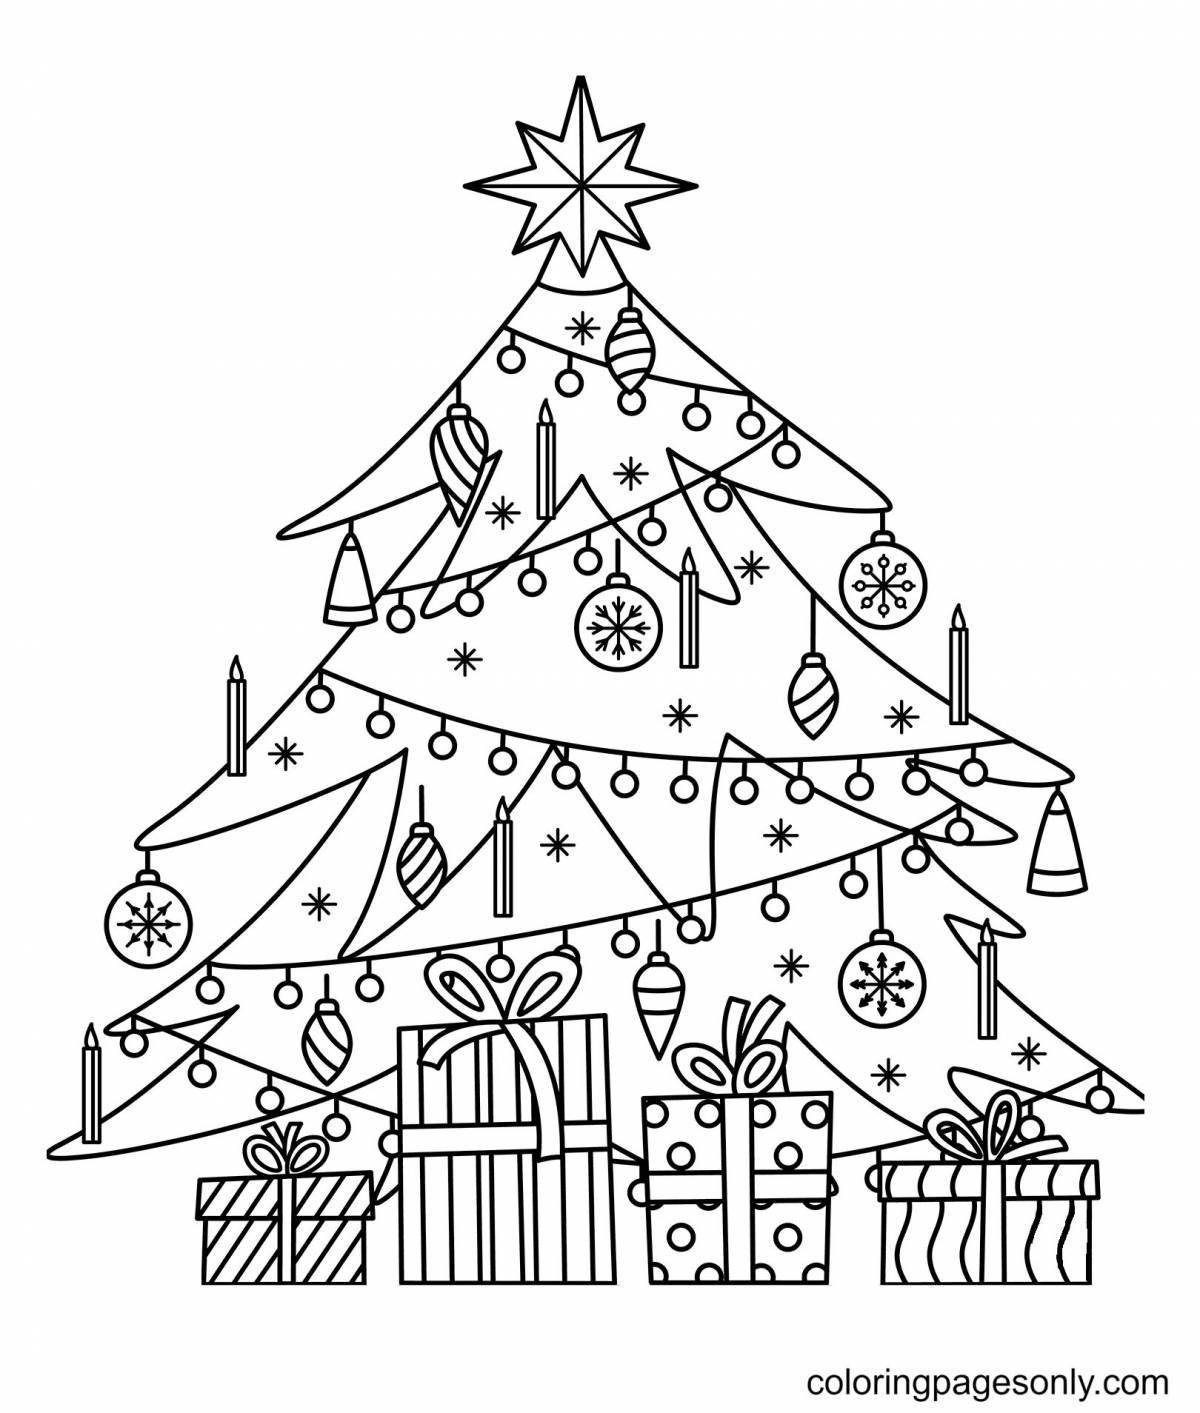 Colorful Christmas tree coloring book